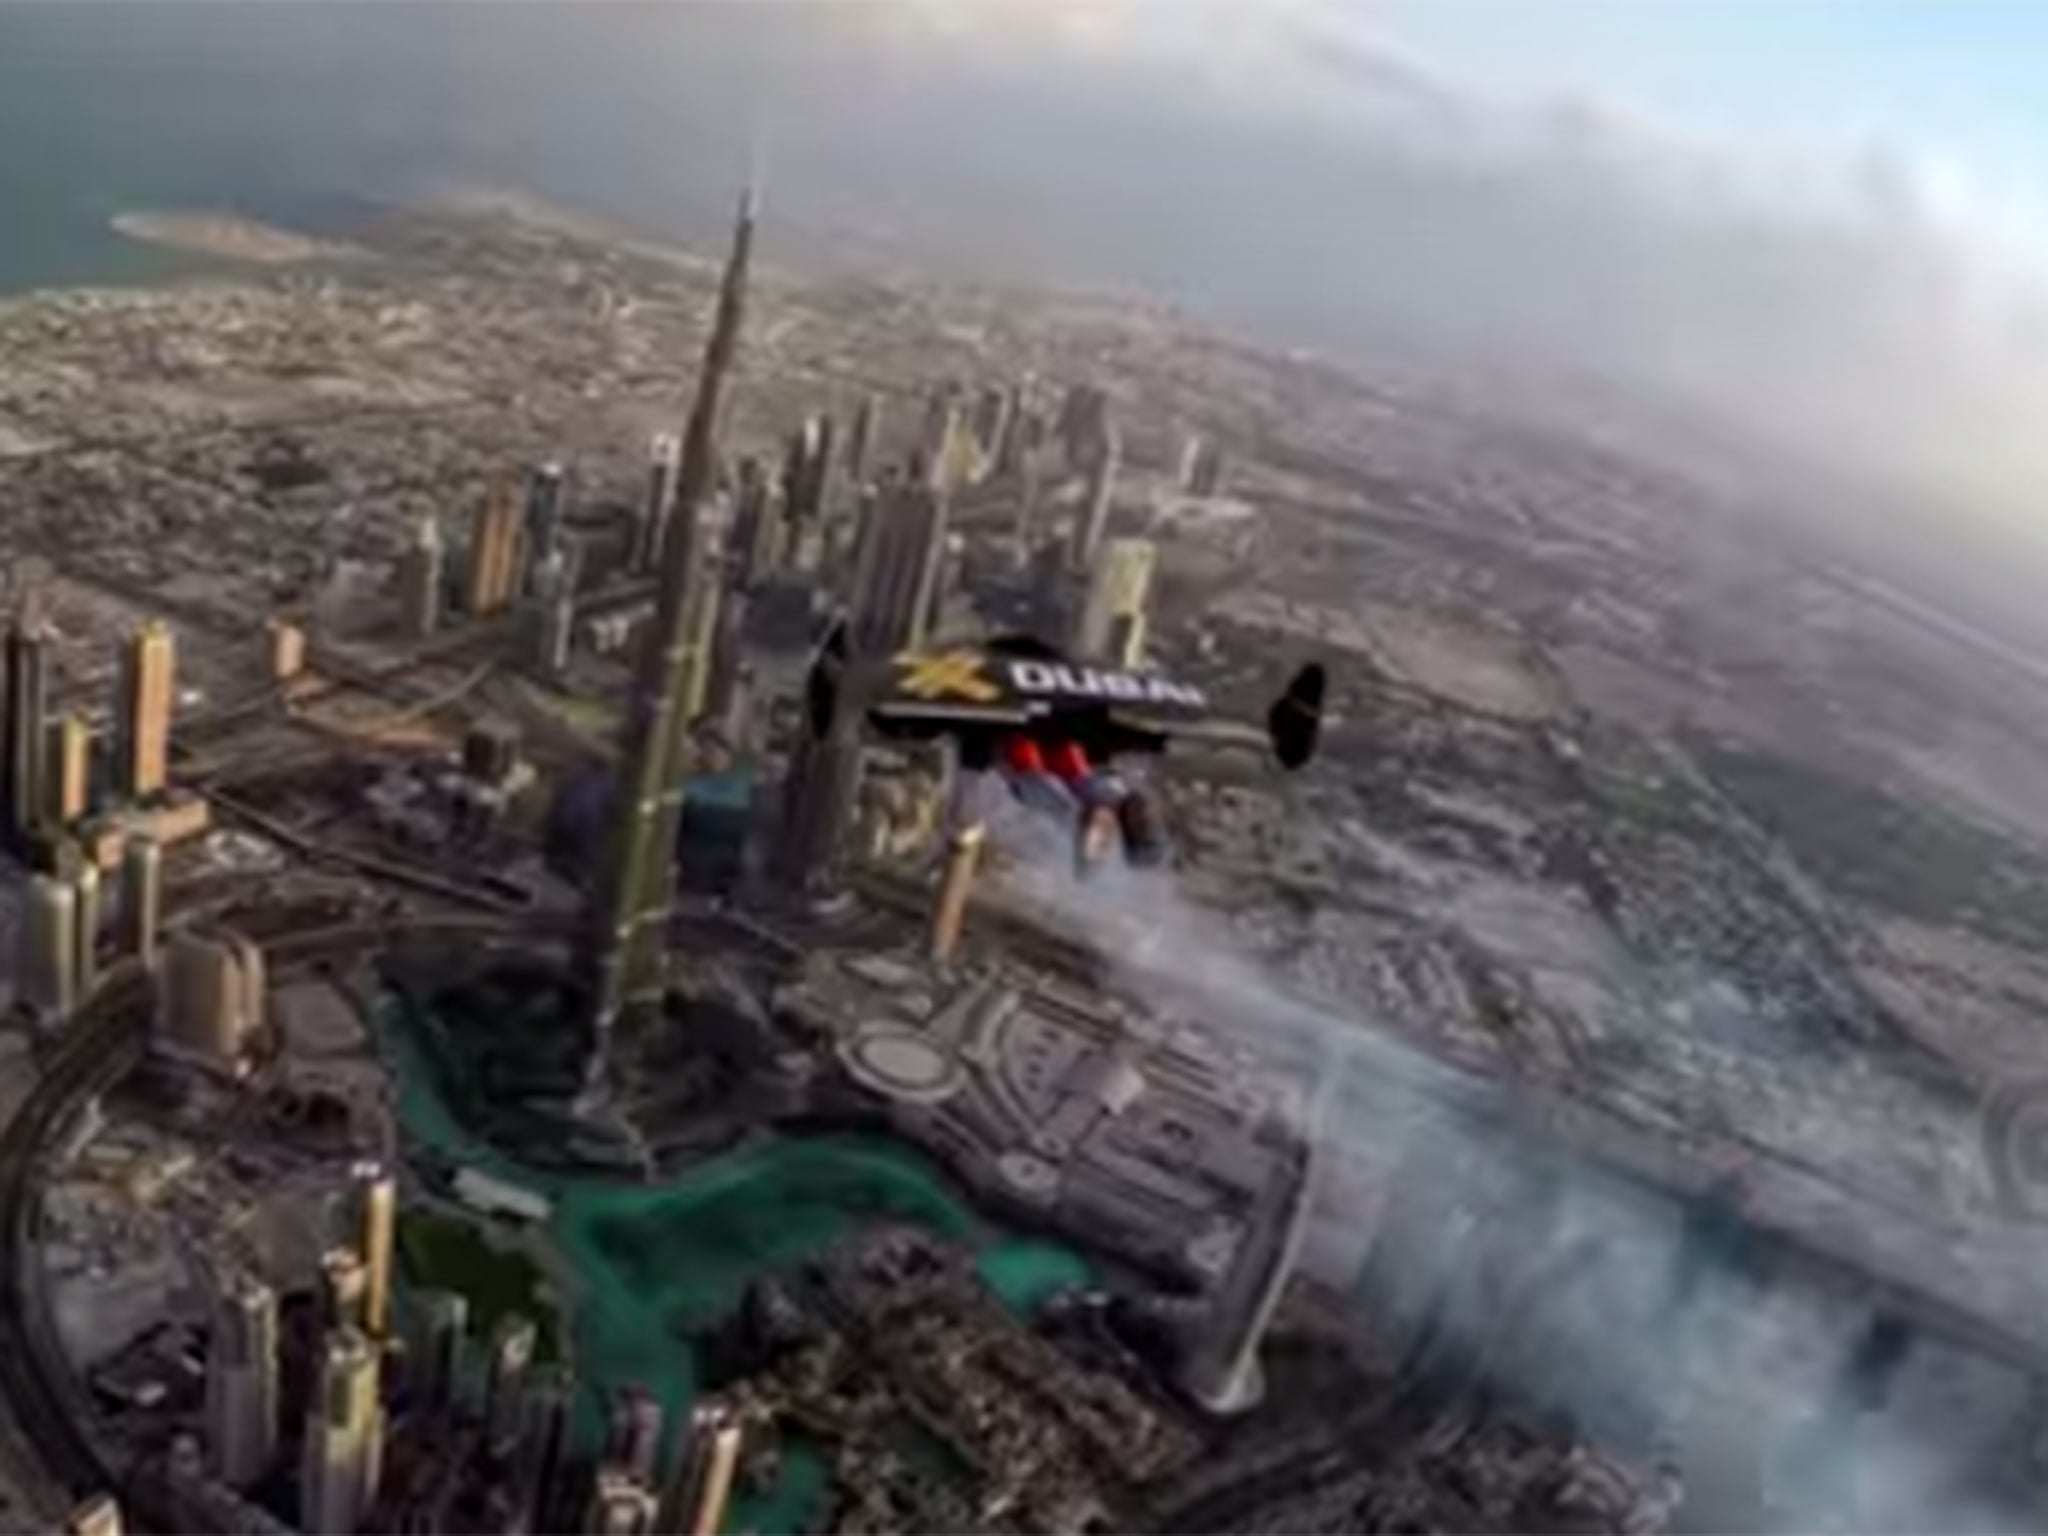 Yves Rossi flying above Dubai with his jetpack wingsuit